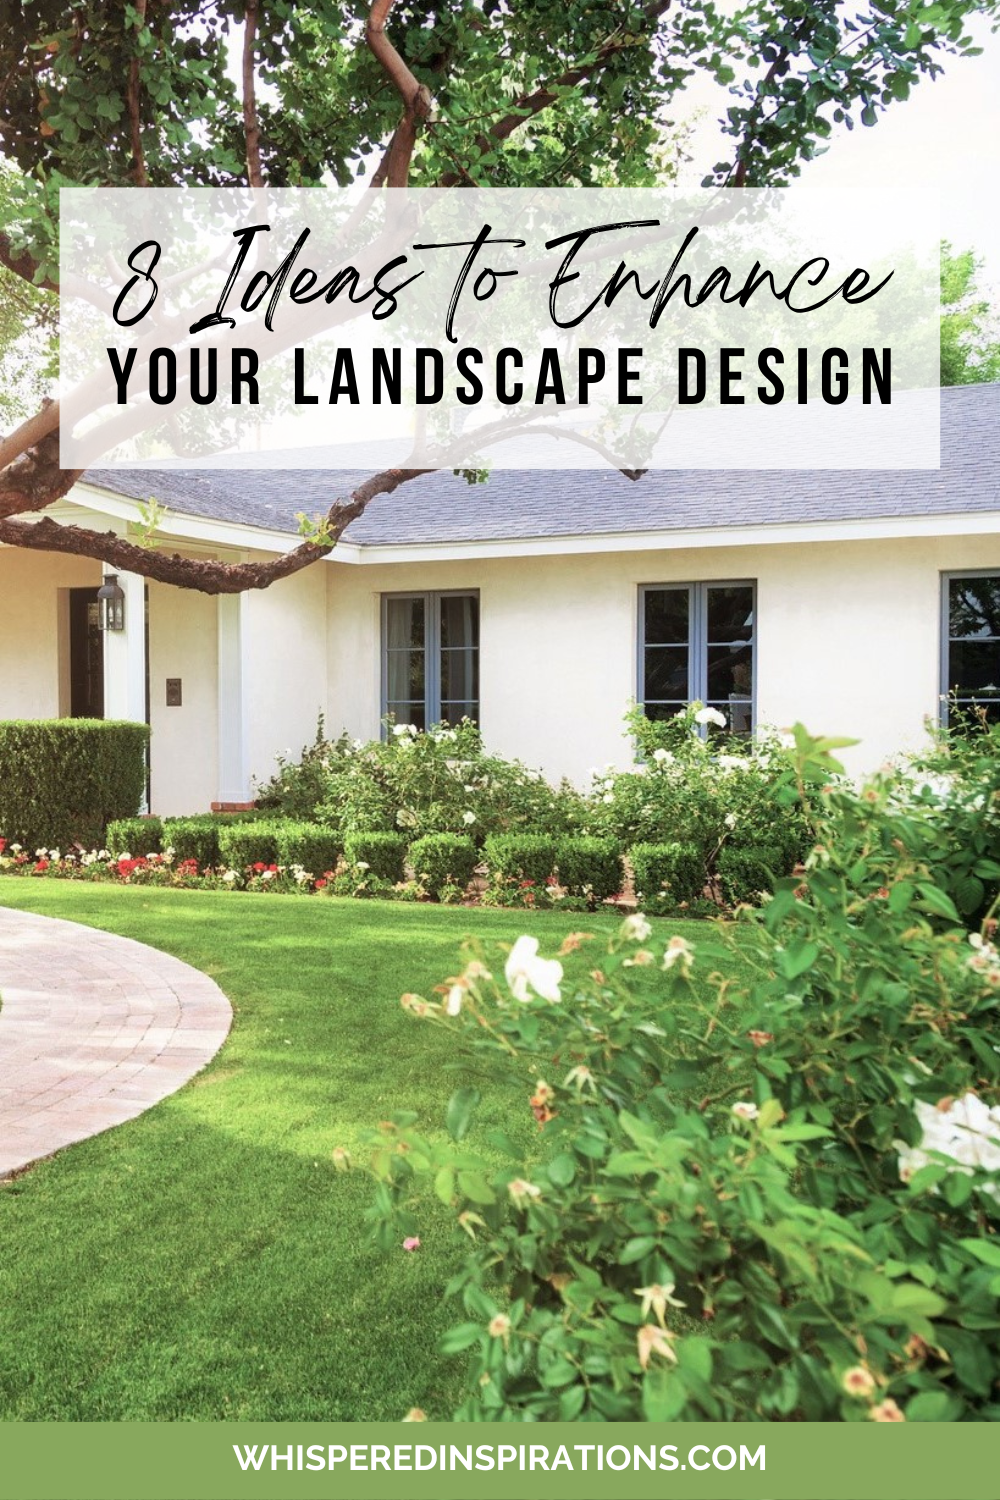 A beautiful black and white home with lush landscaping and a large tree. This article covers ideas to enhance your landscape design.